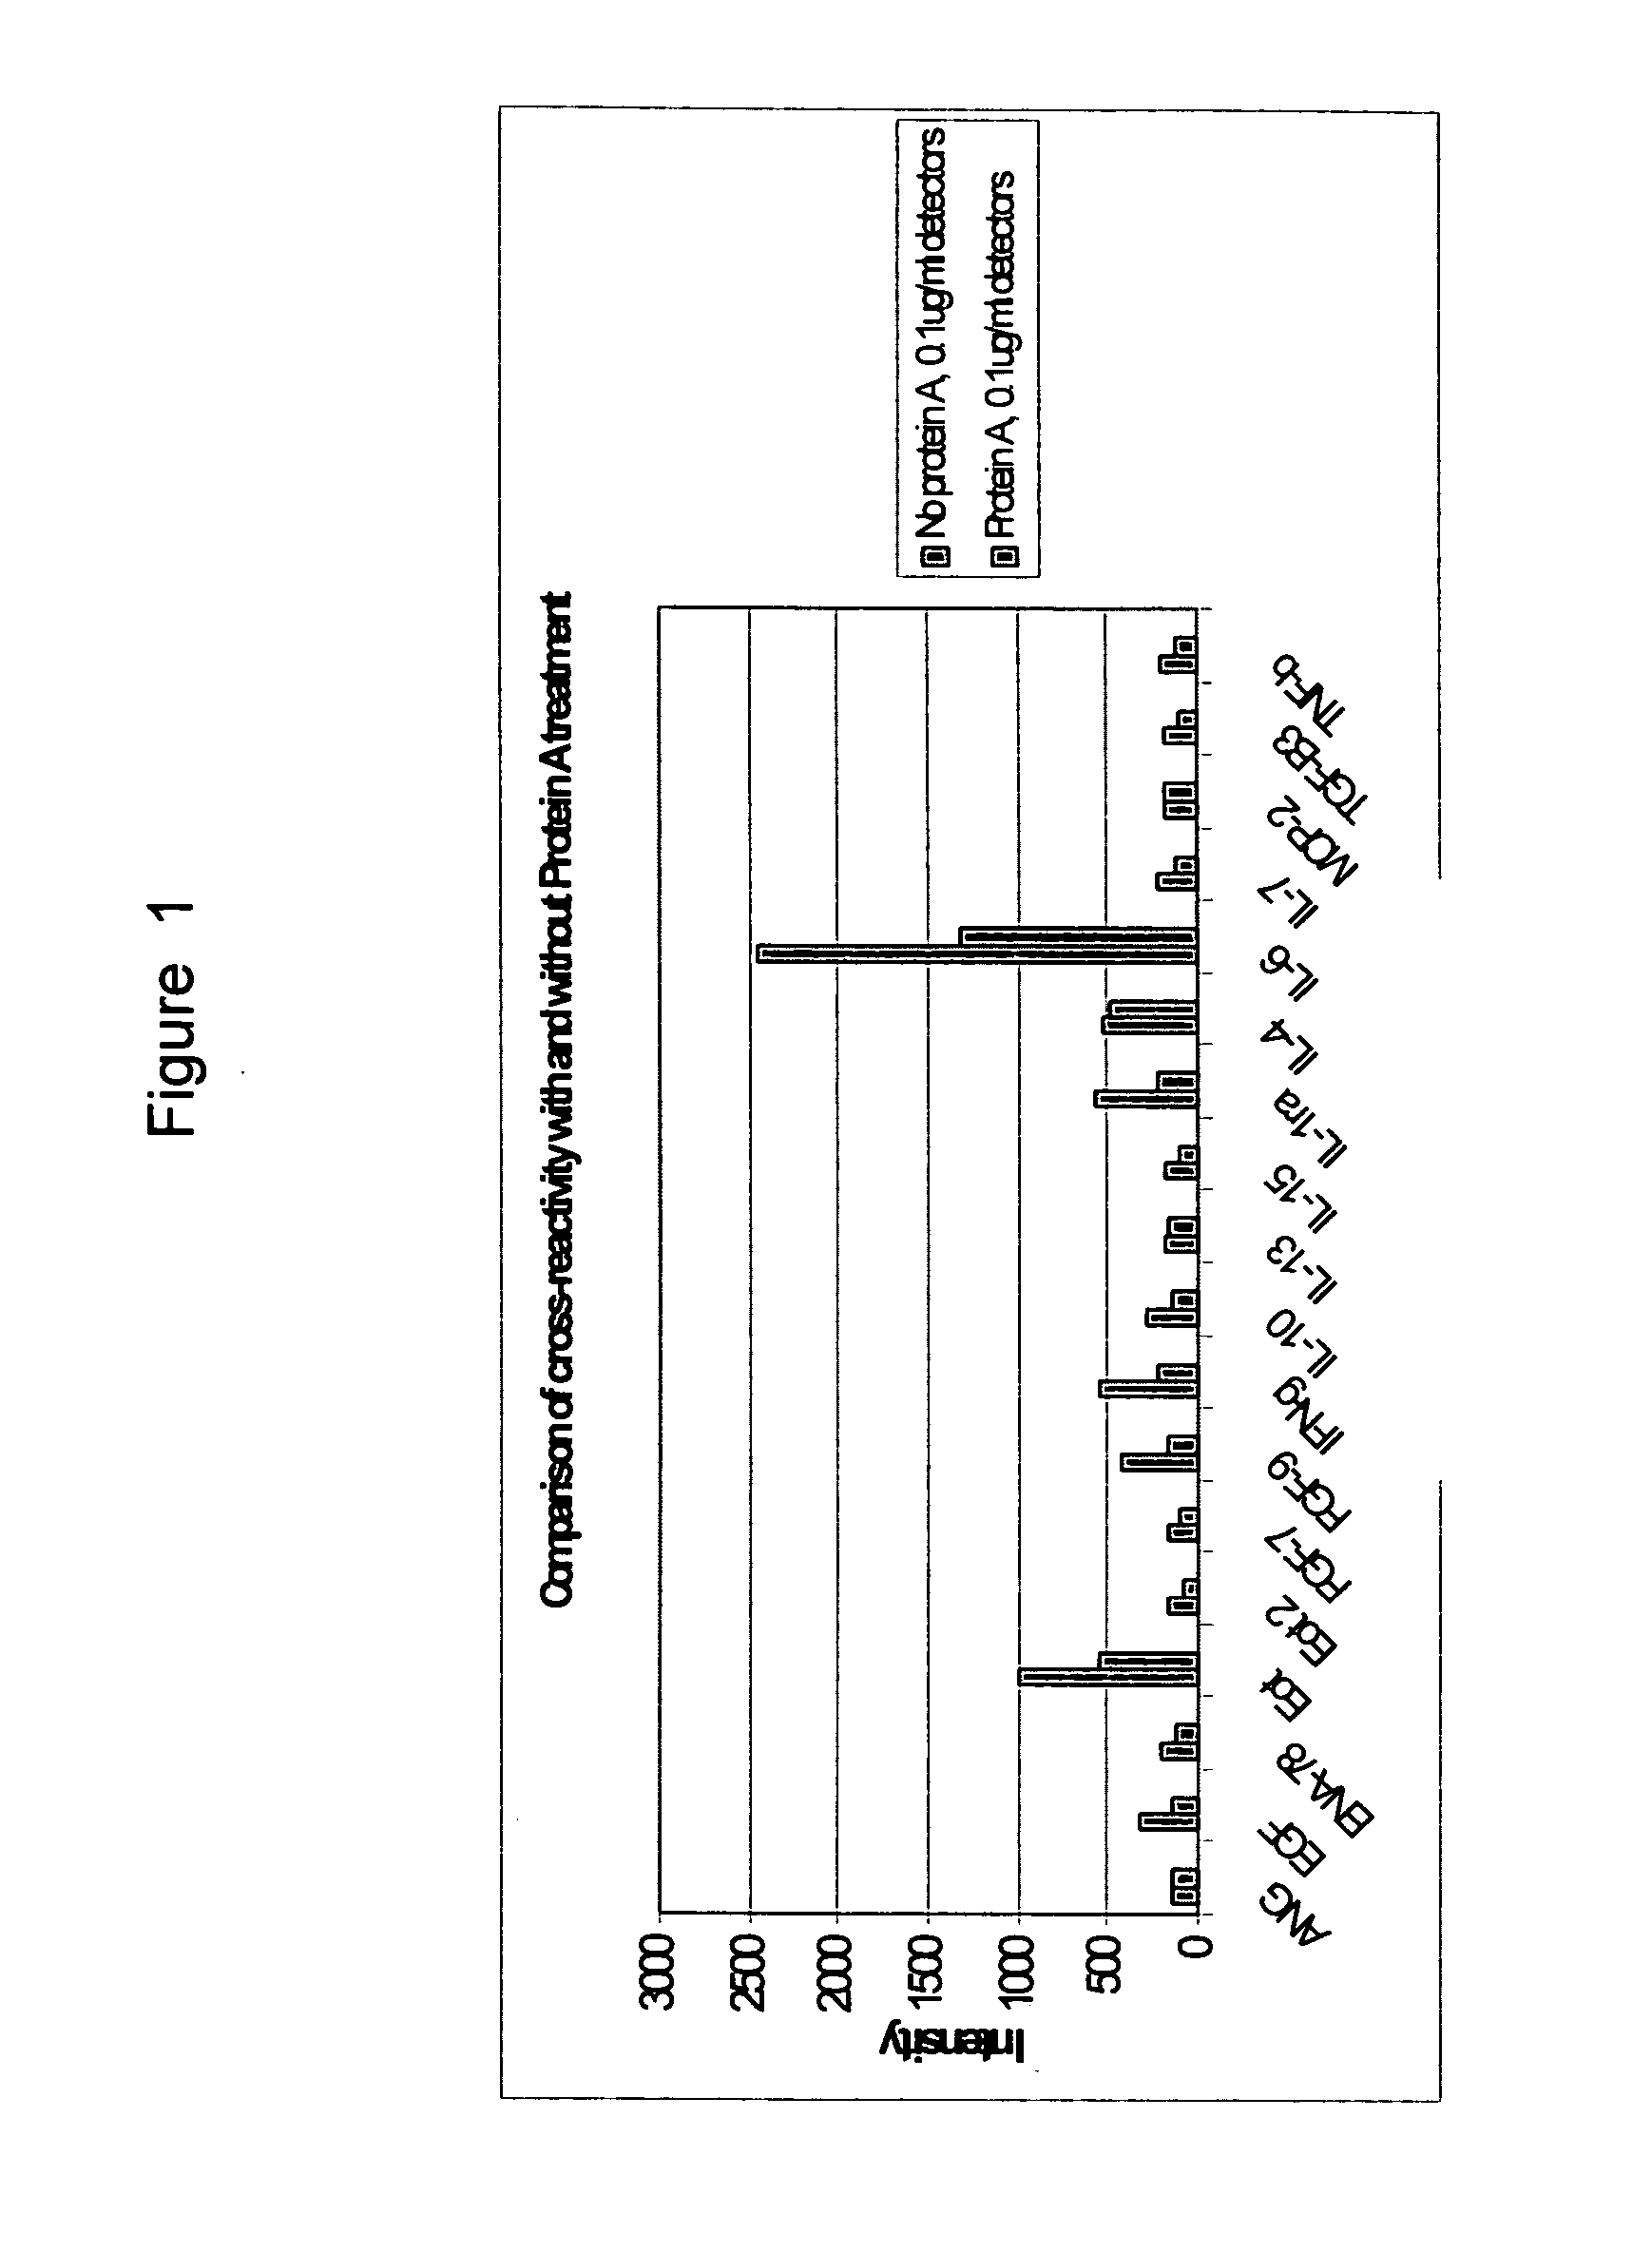 Suppression of cross-reactivity and non-specific binding by antibodies using protein A